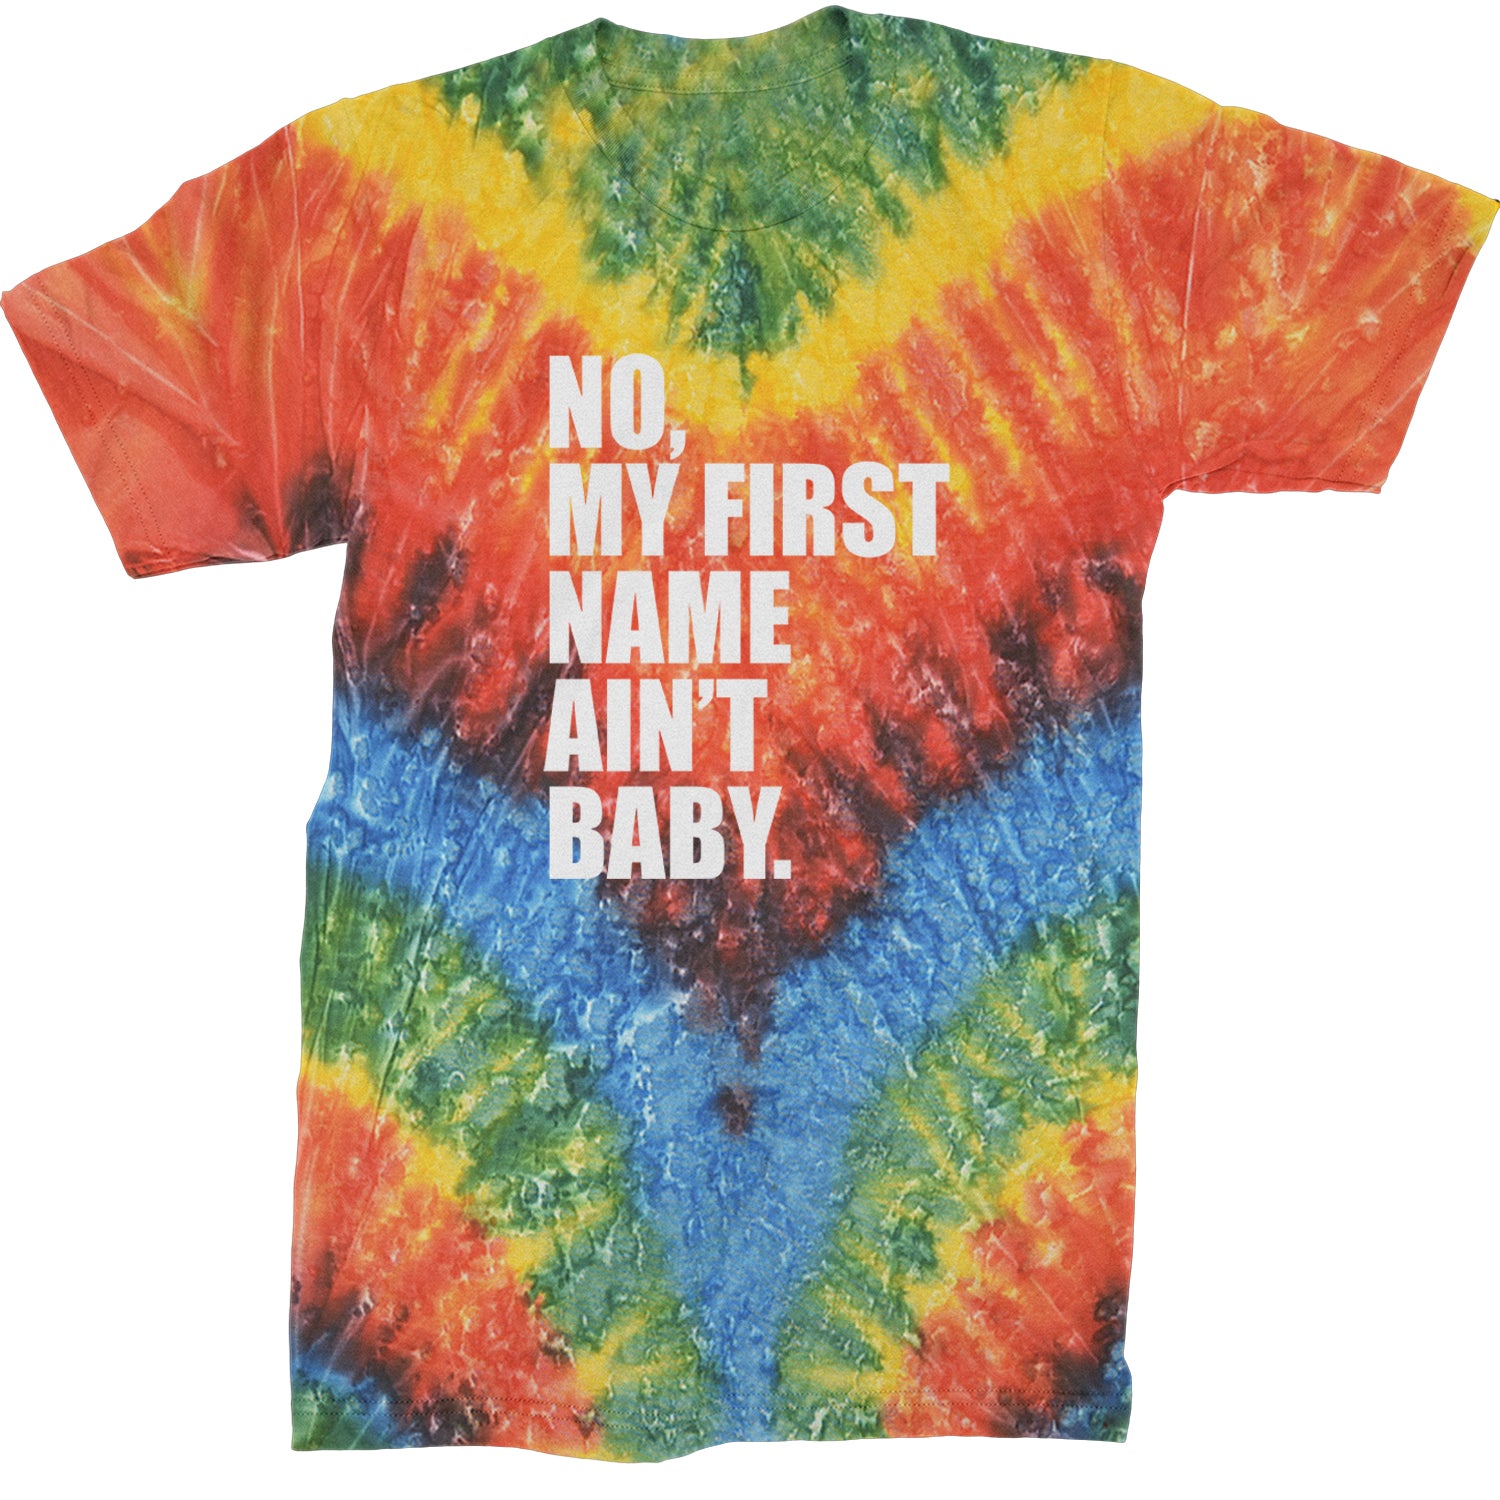 No My First Name Ain't Baby Together Again Mens T-shirt Tie-Dye Woodstock